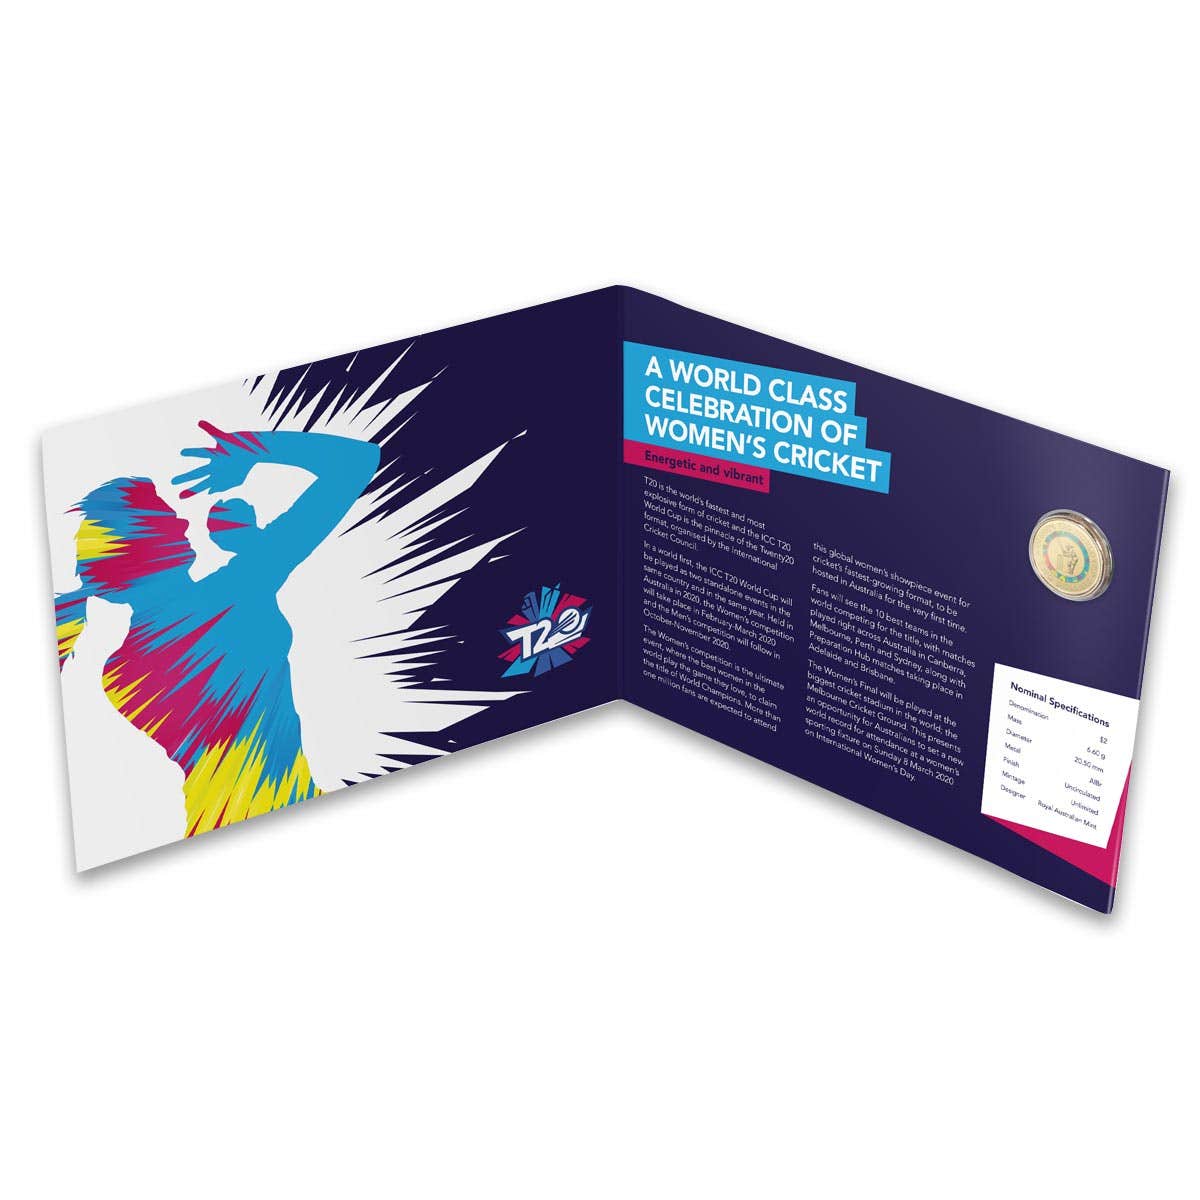 ICC Women'T20 World Cup 2020 $2 Al-Br Coloured Uncirculated Coin